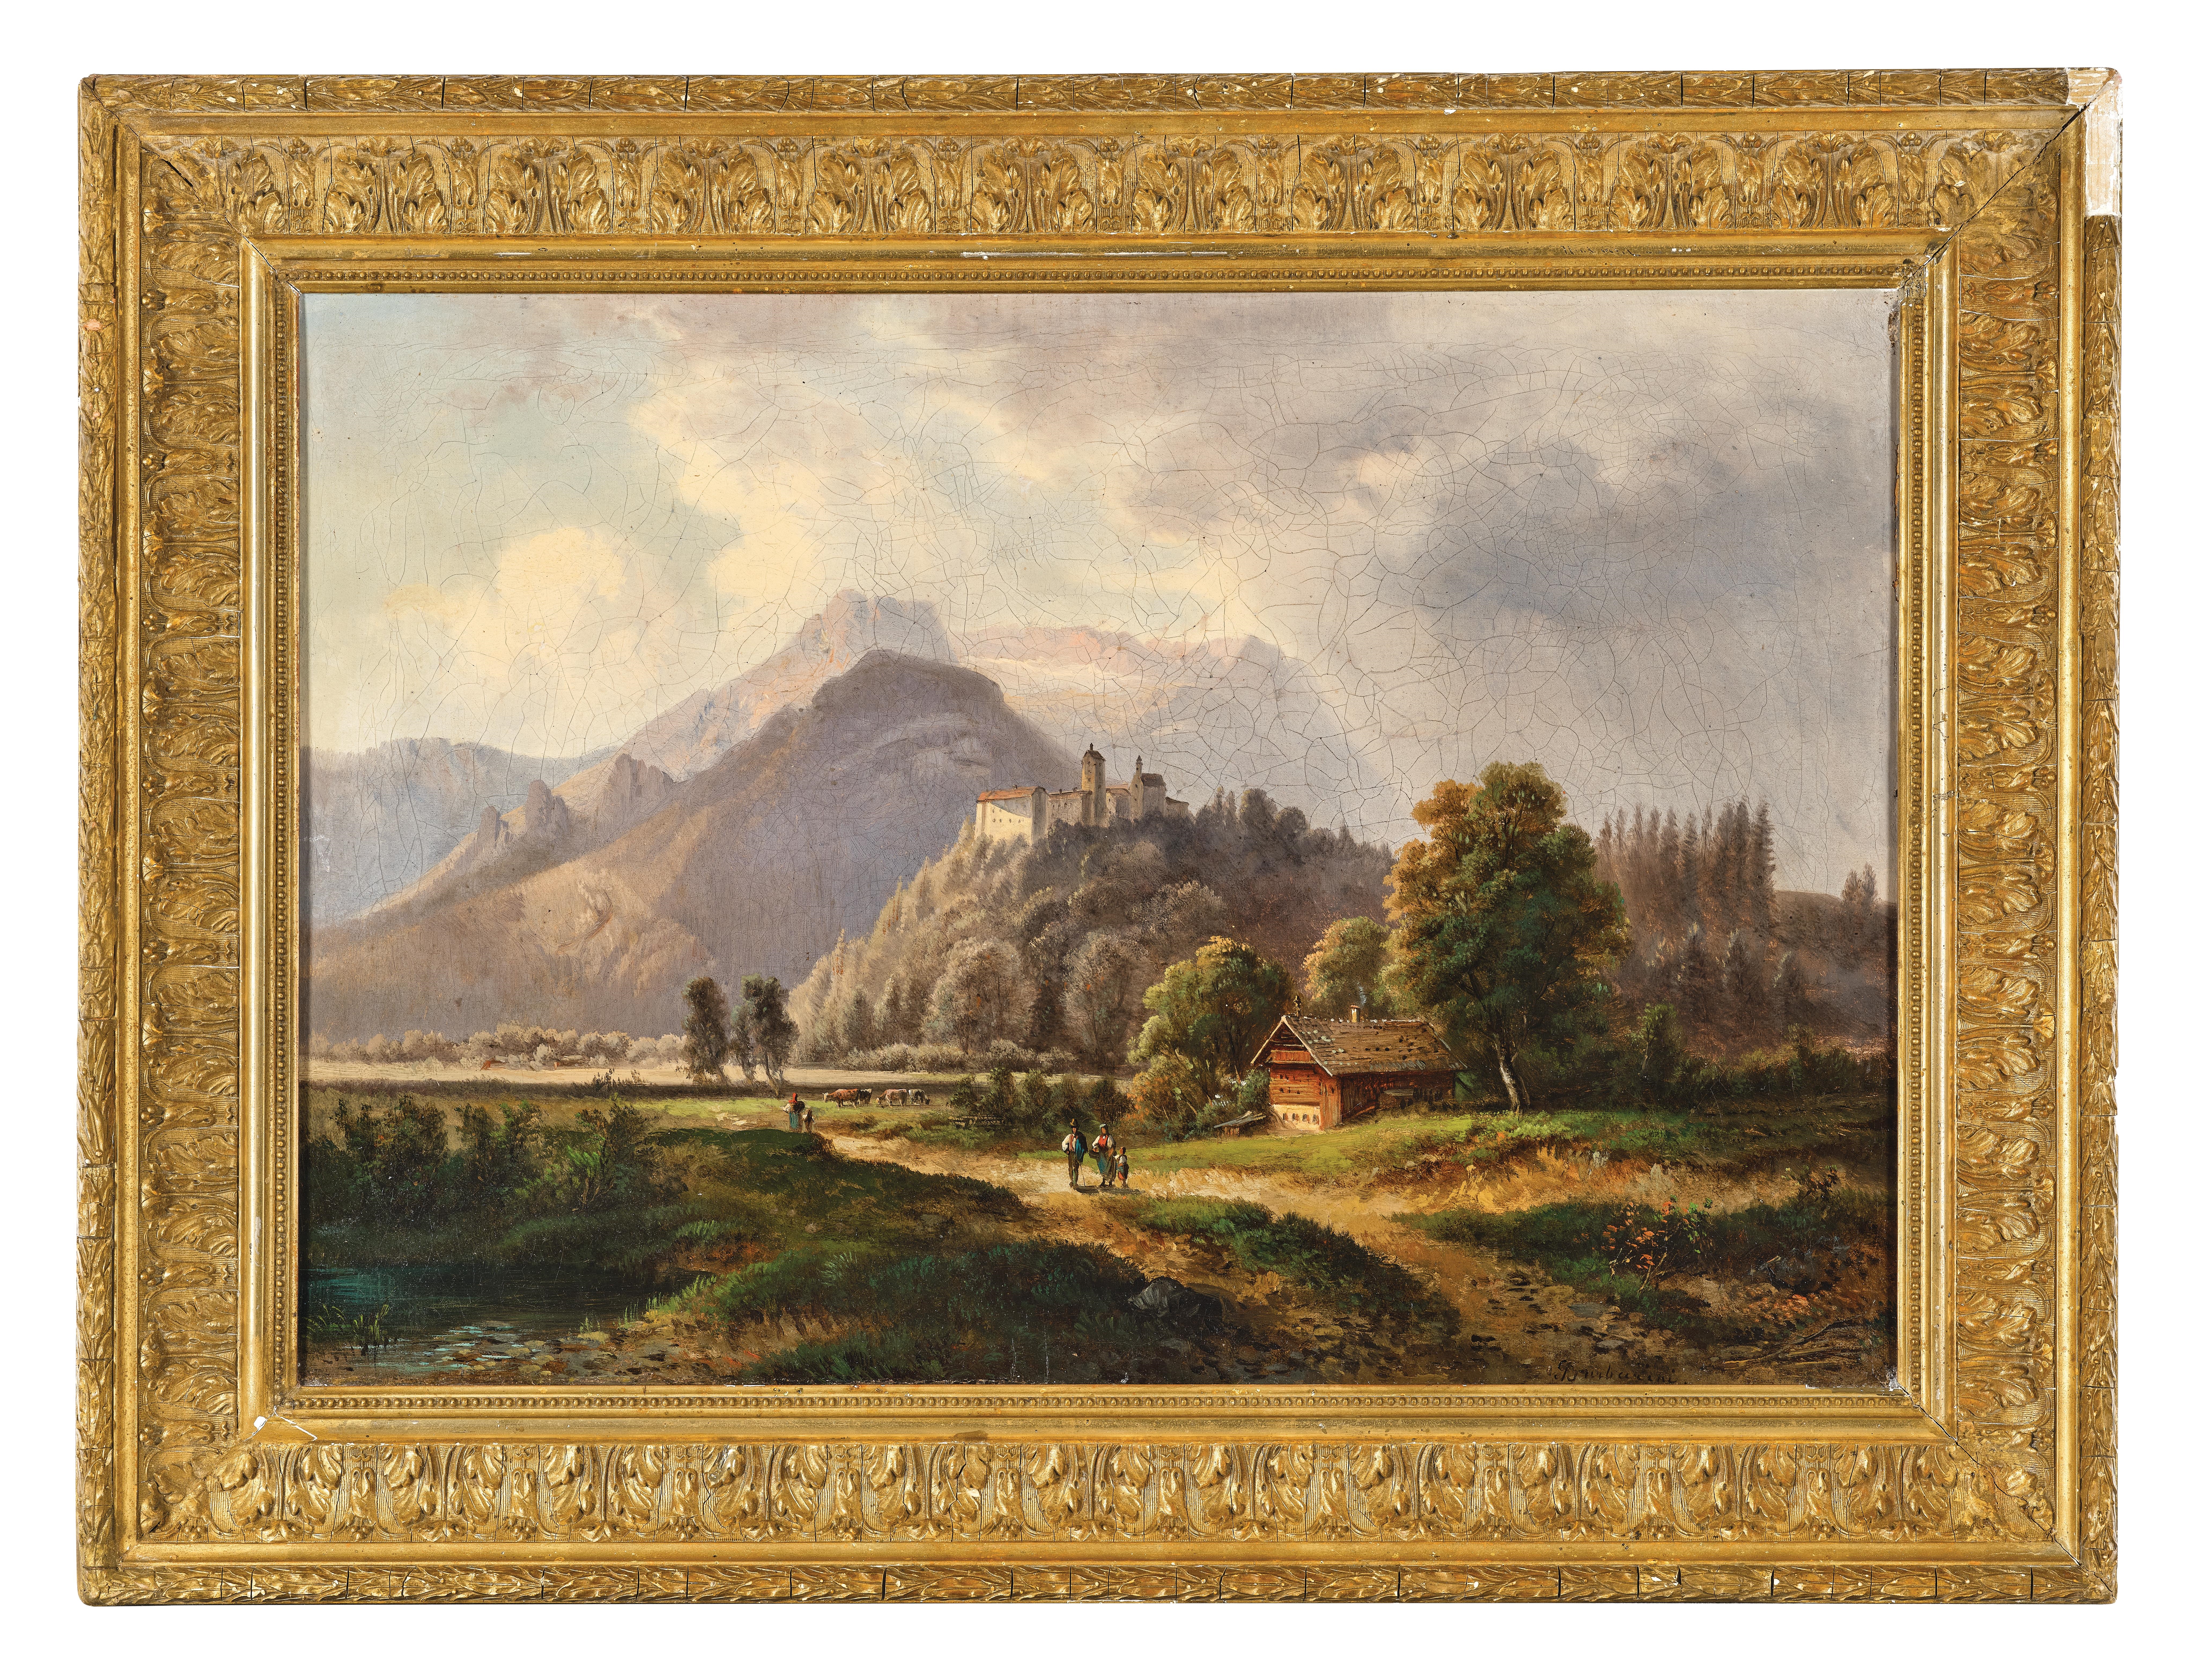 Artwork by Gustav Barbarini, A View of the Glanegg Castle Ruins, Made of oil on canvas